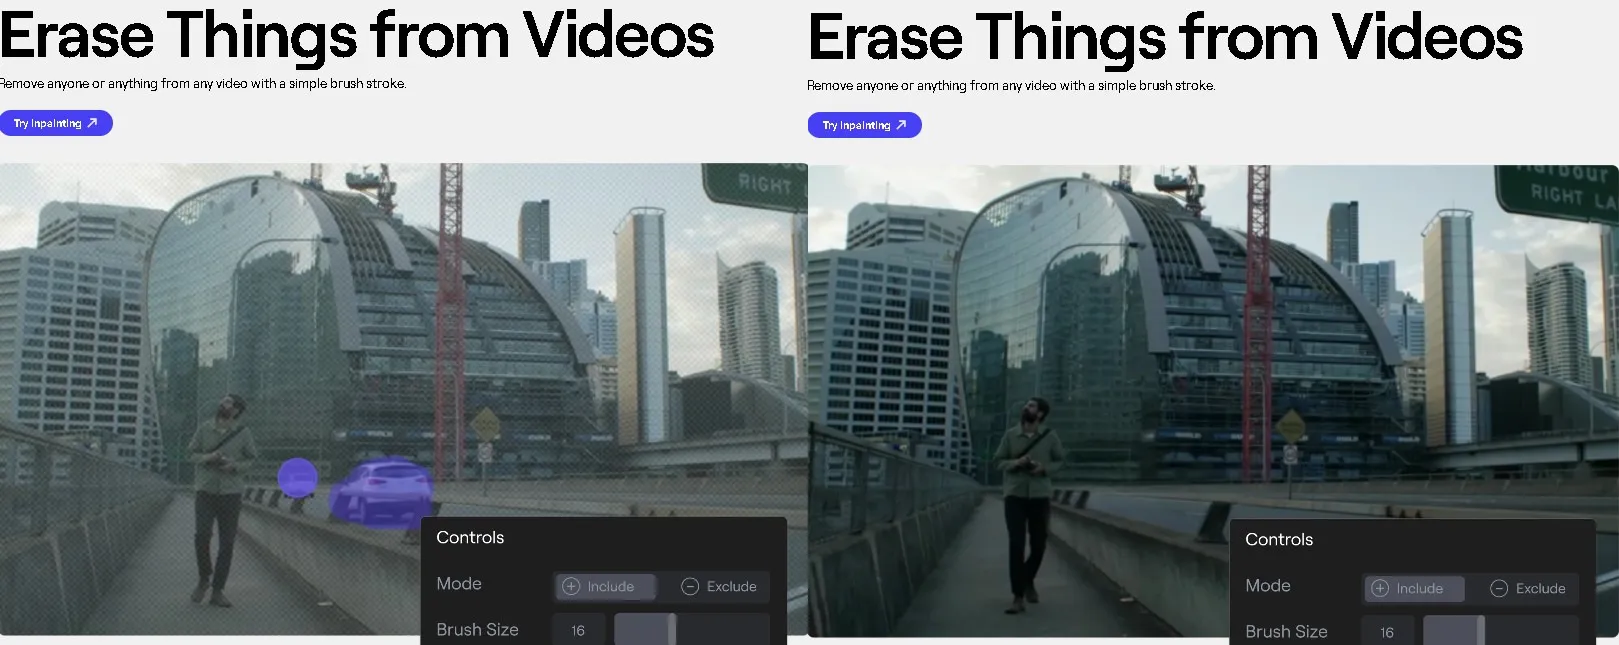 runway ai erase things from videos